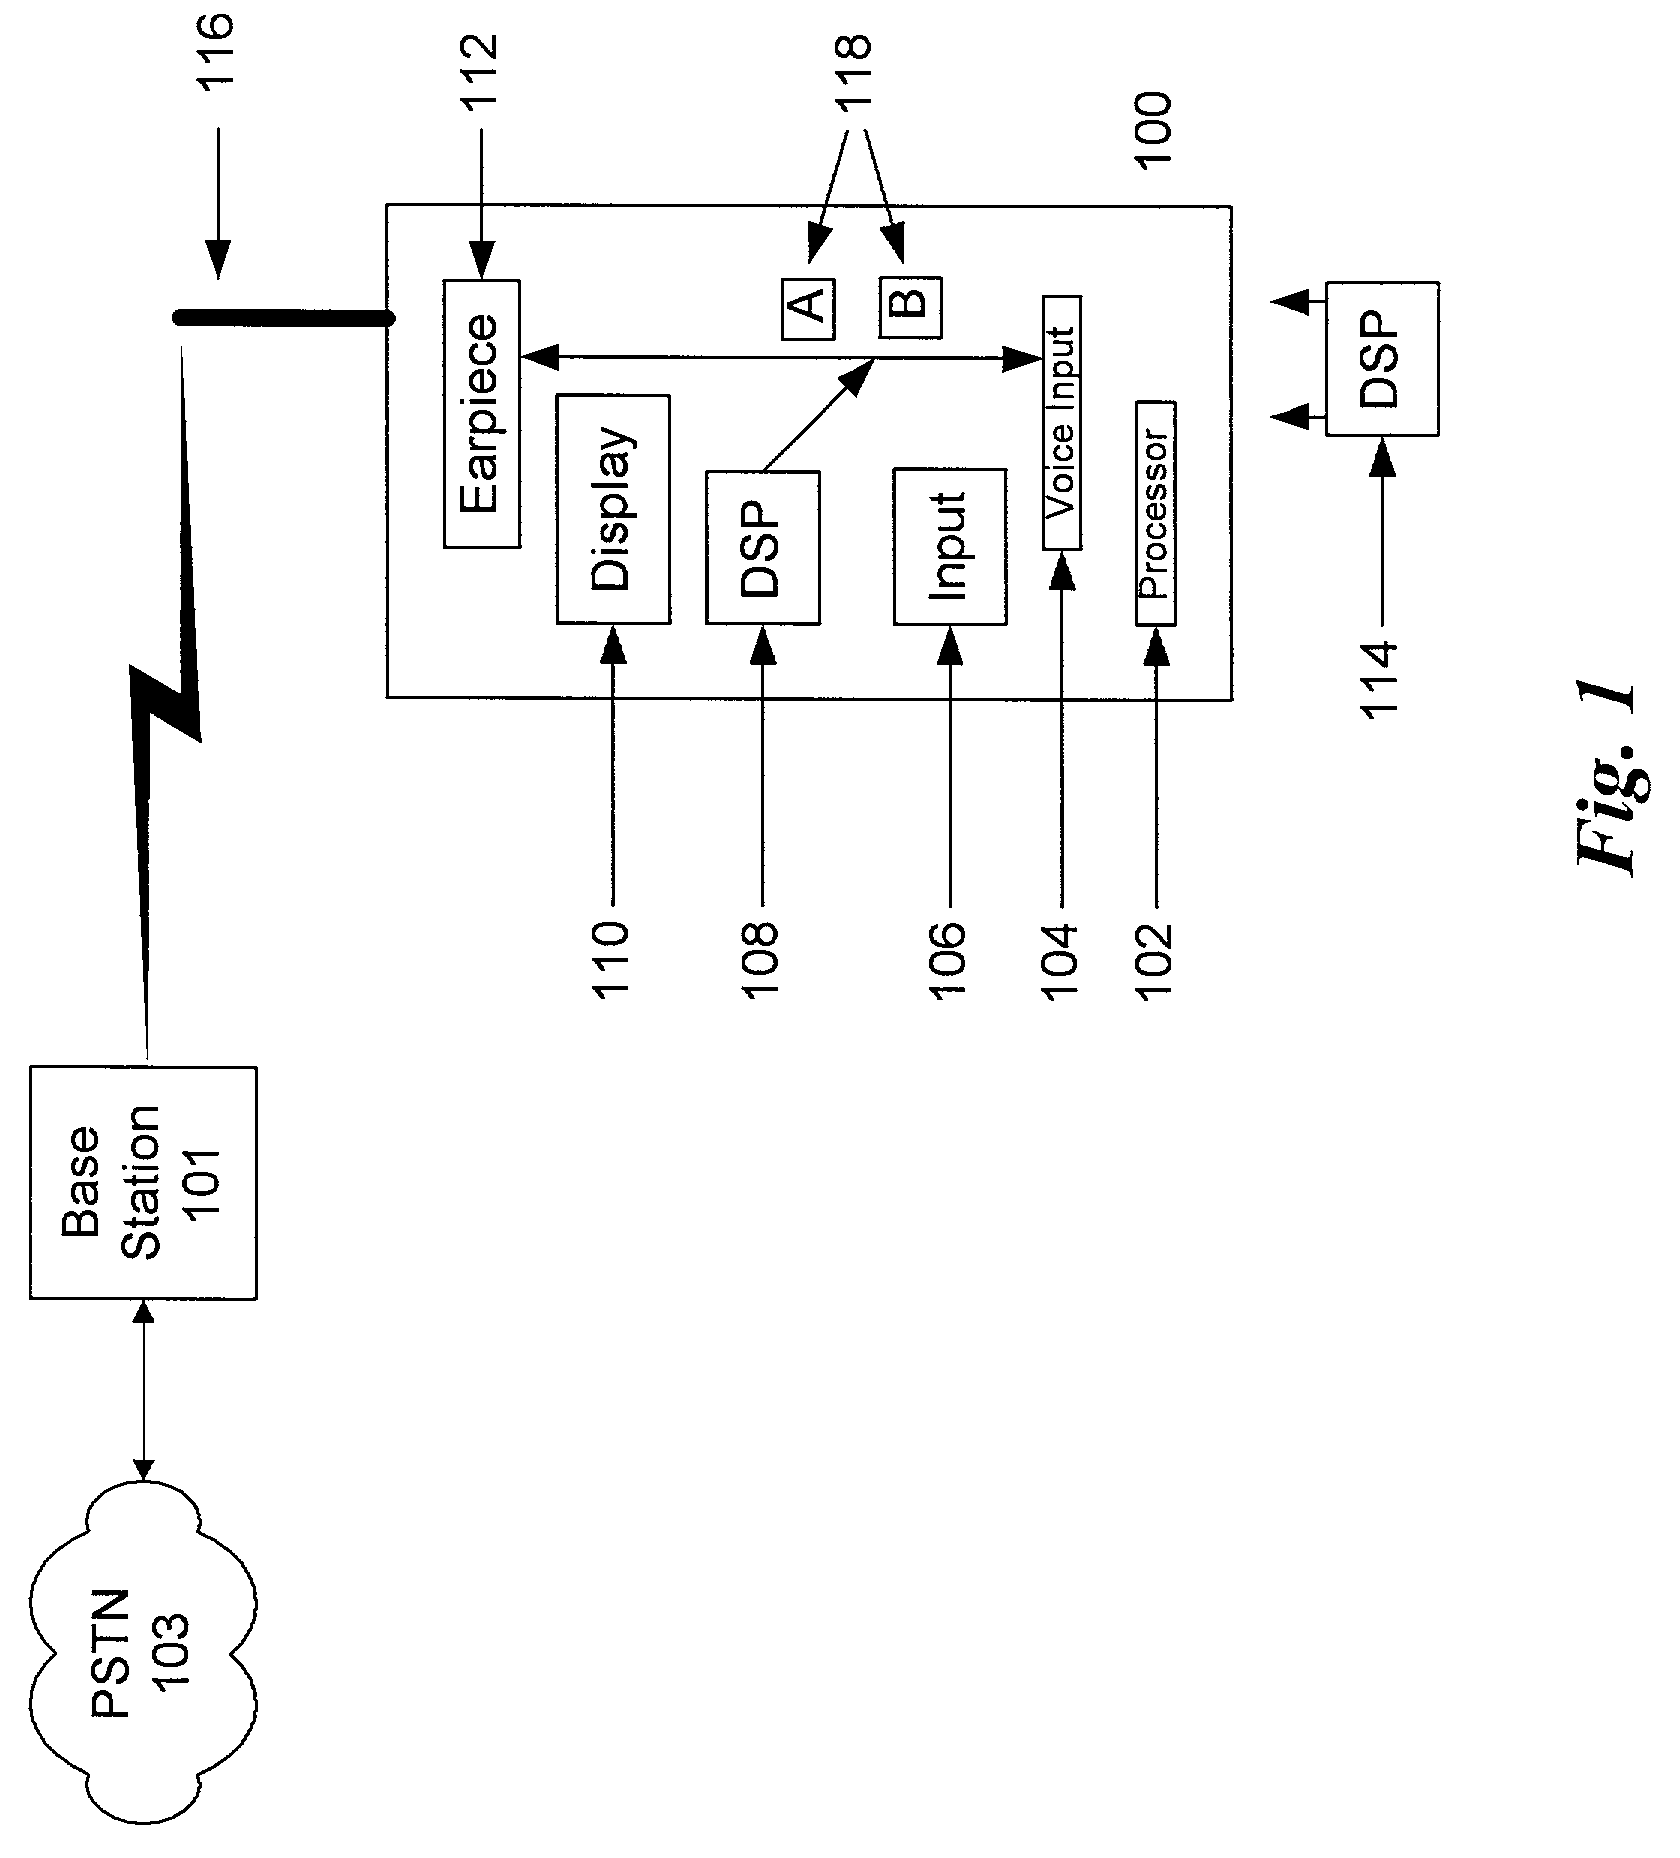 System and method for providing an automatic response to a telephone call